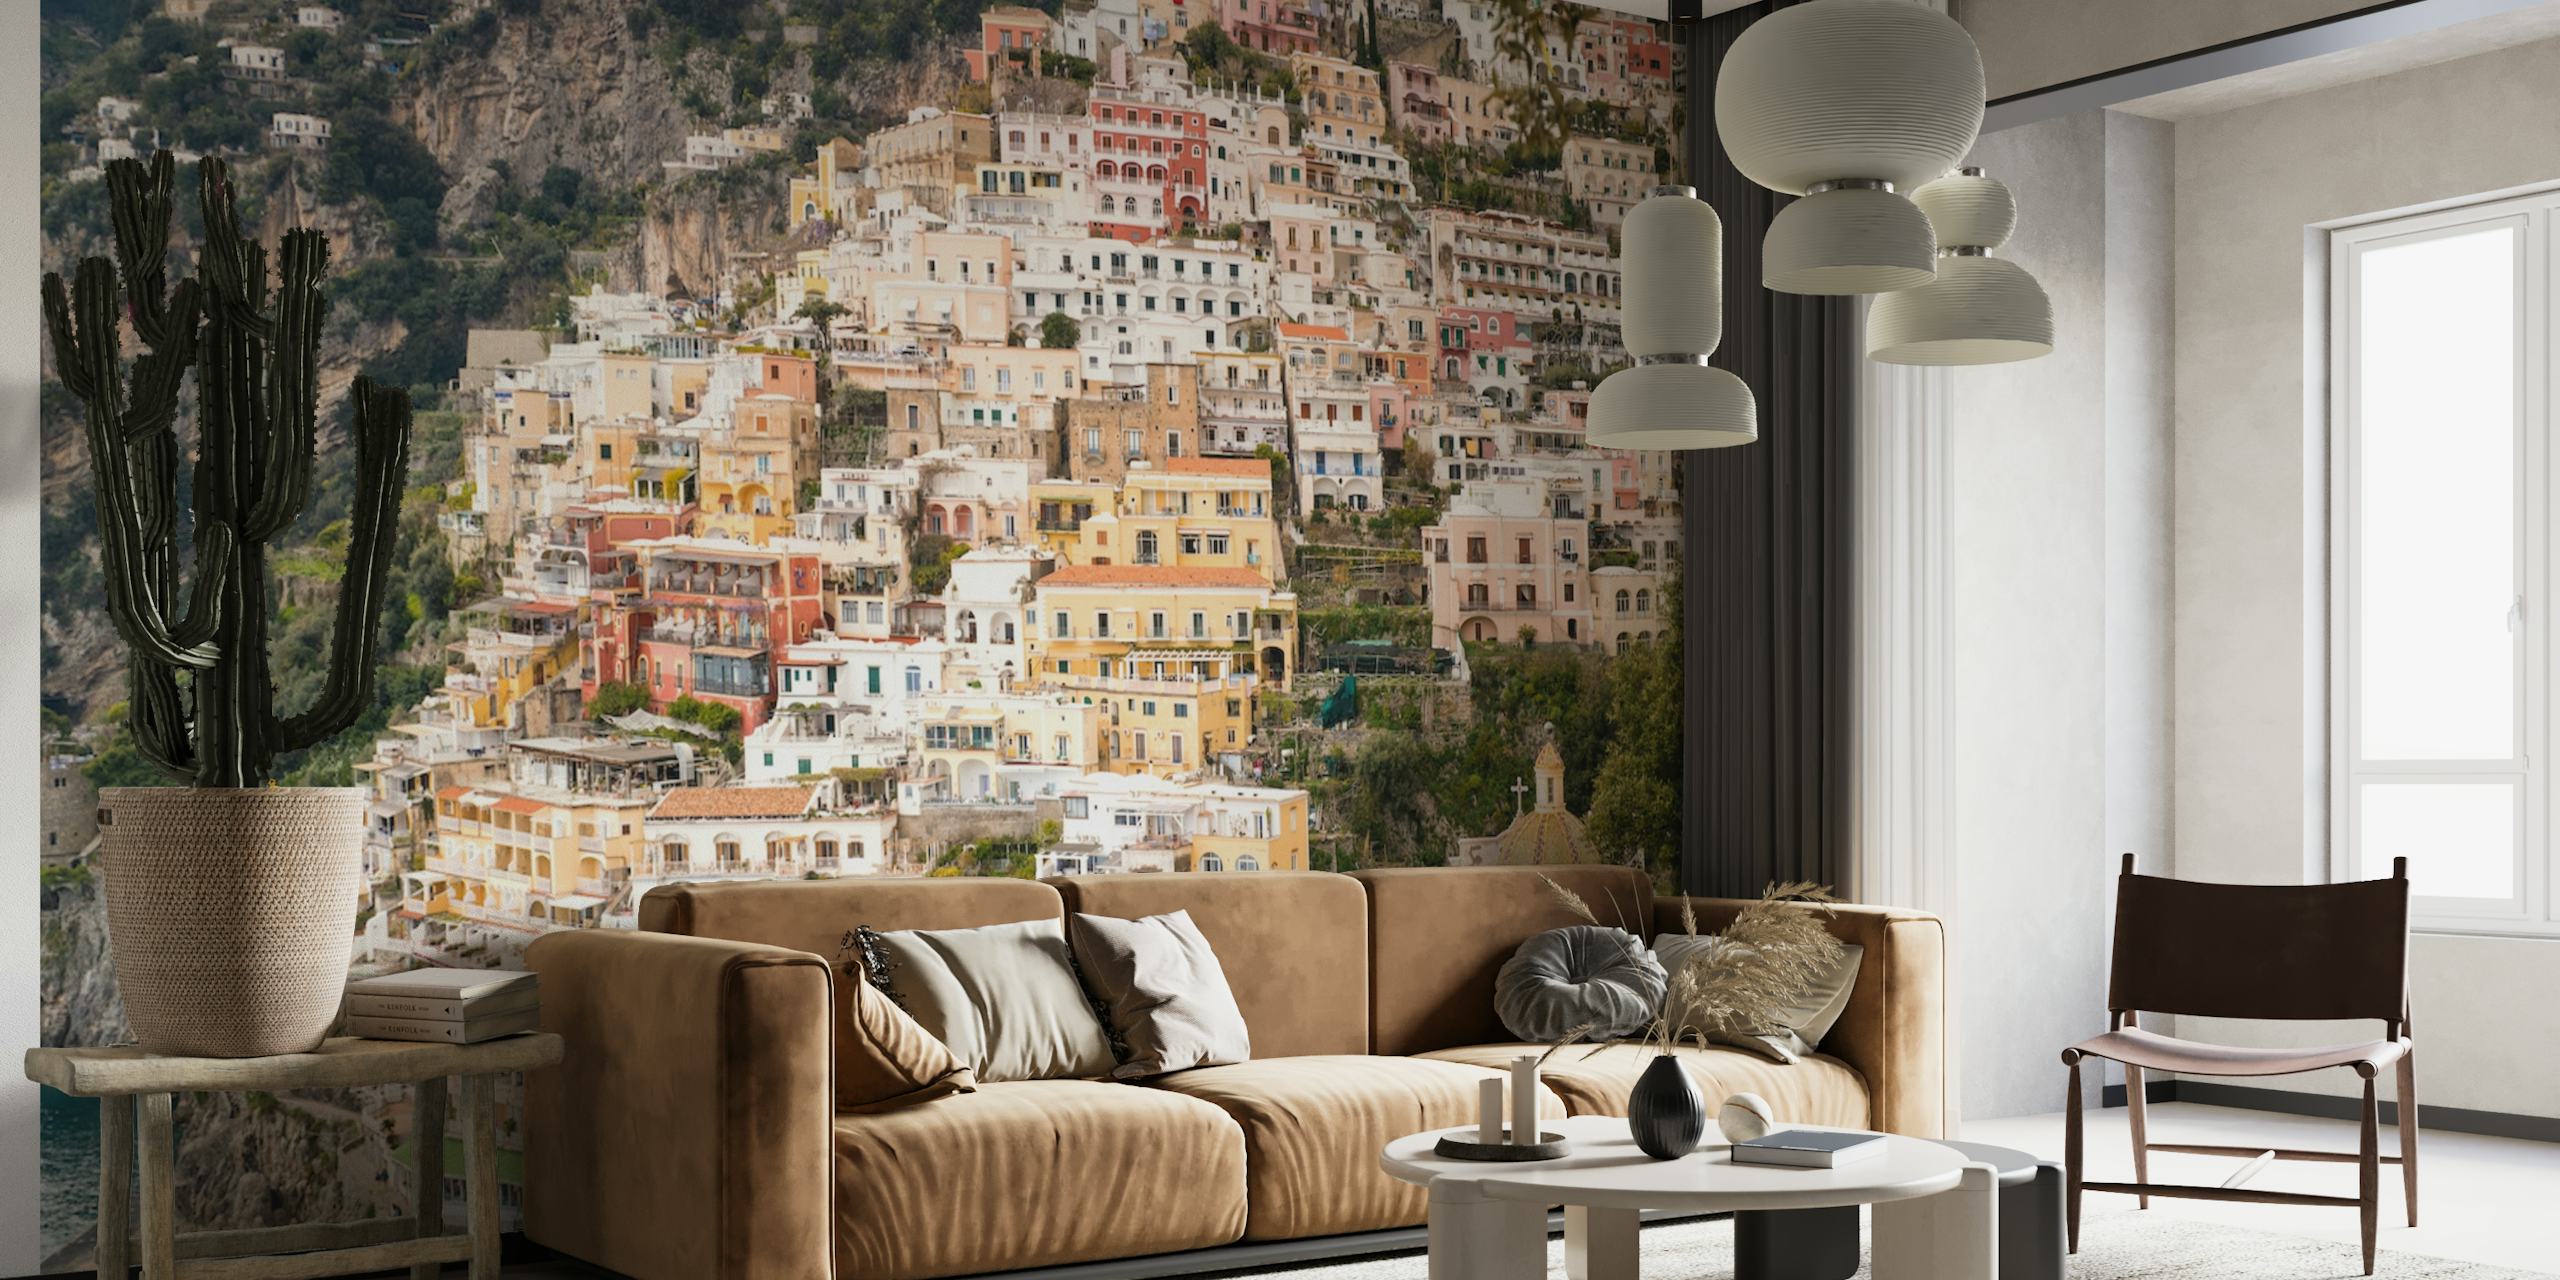 Positano Amalfi Coast wall mural with colorful buildings and Mediterranean vibe